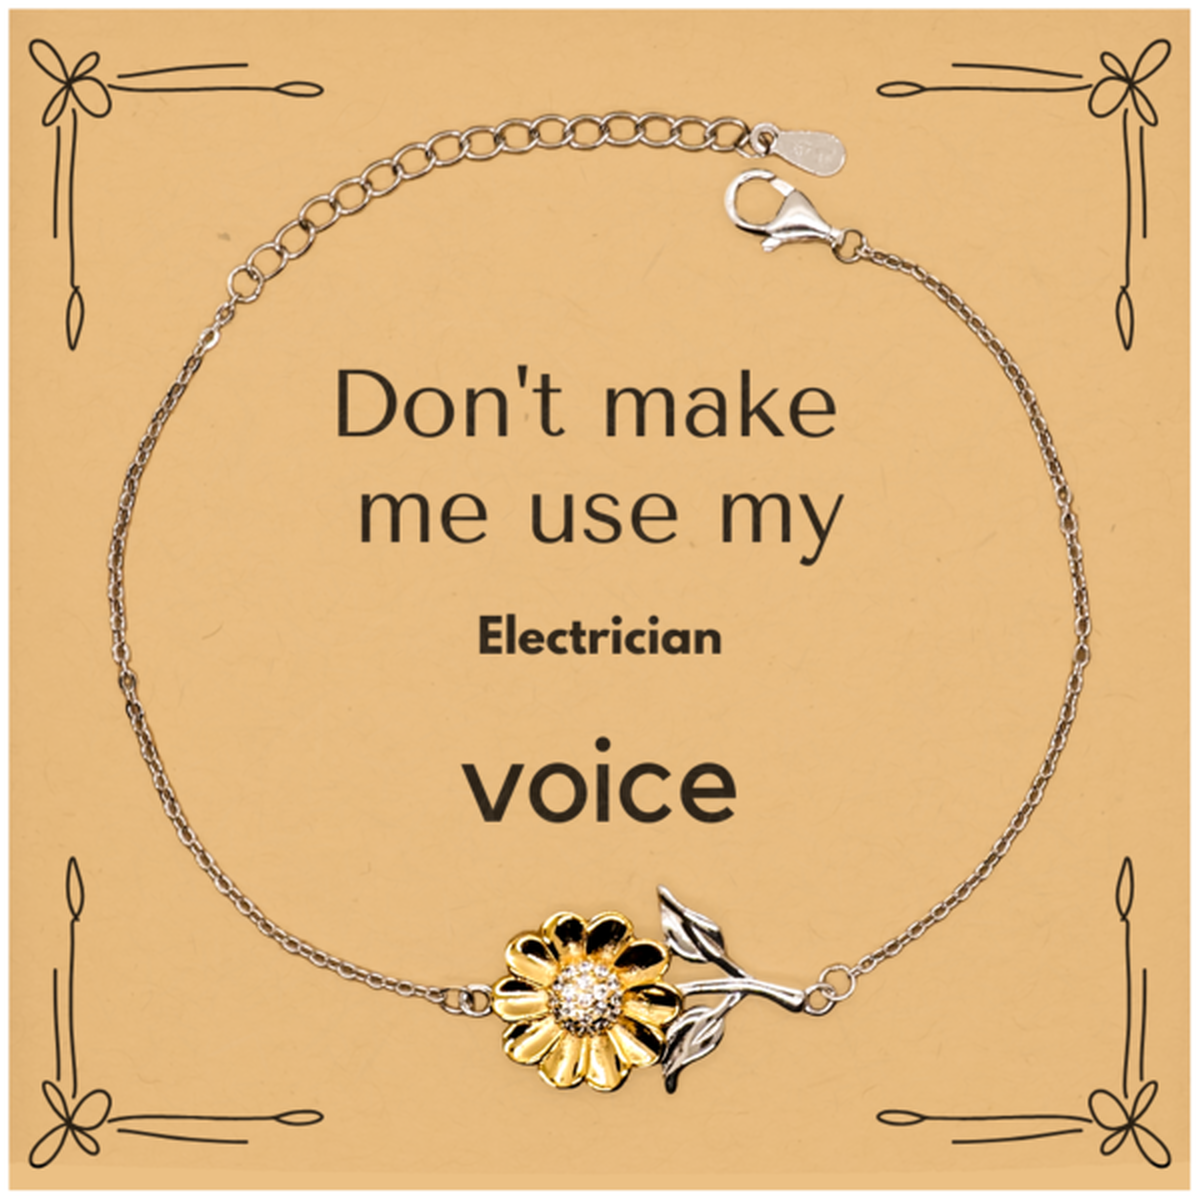 Don't make me use my Electrician voice, Sarcasm Electrician Card Gifts, Christmas Electrician Sunflower Bracelet Birthday Unique Gifts For Electrician Coworkers, Men, Women, Colleague, Friends